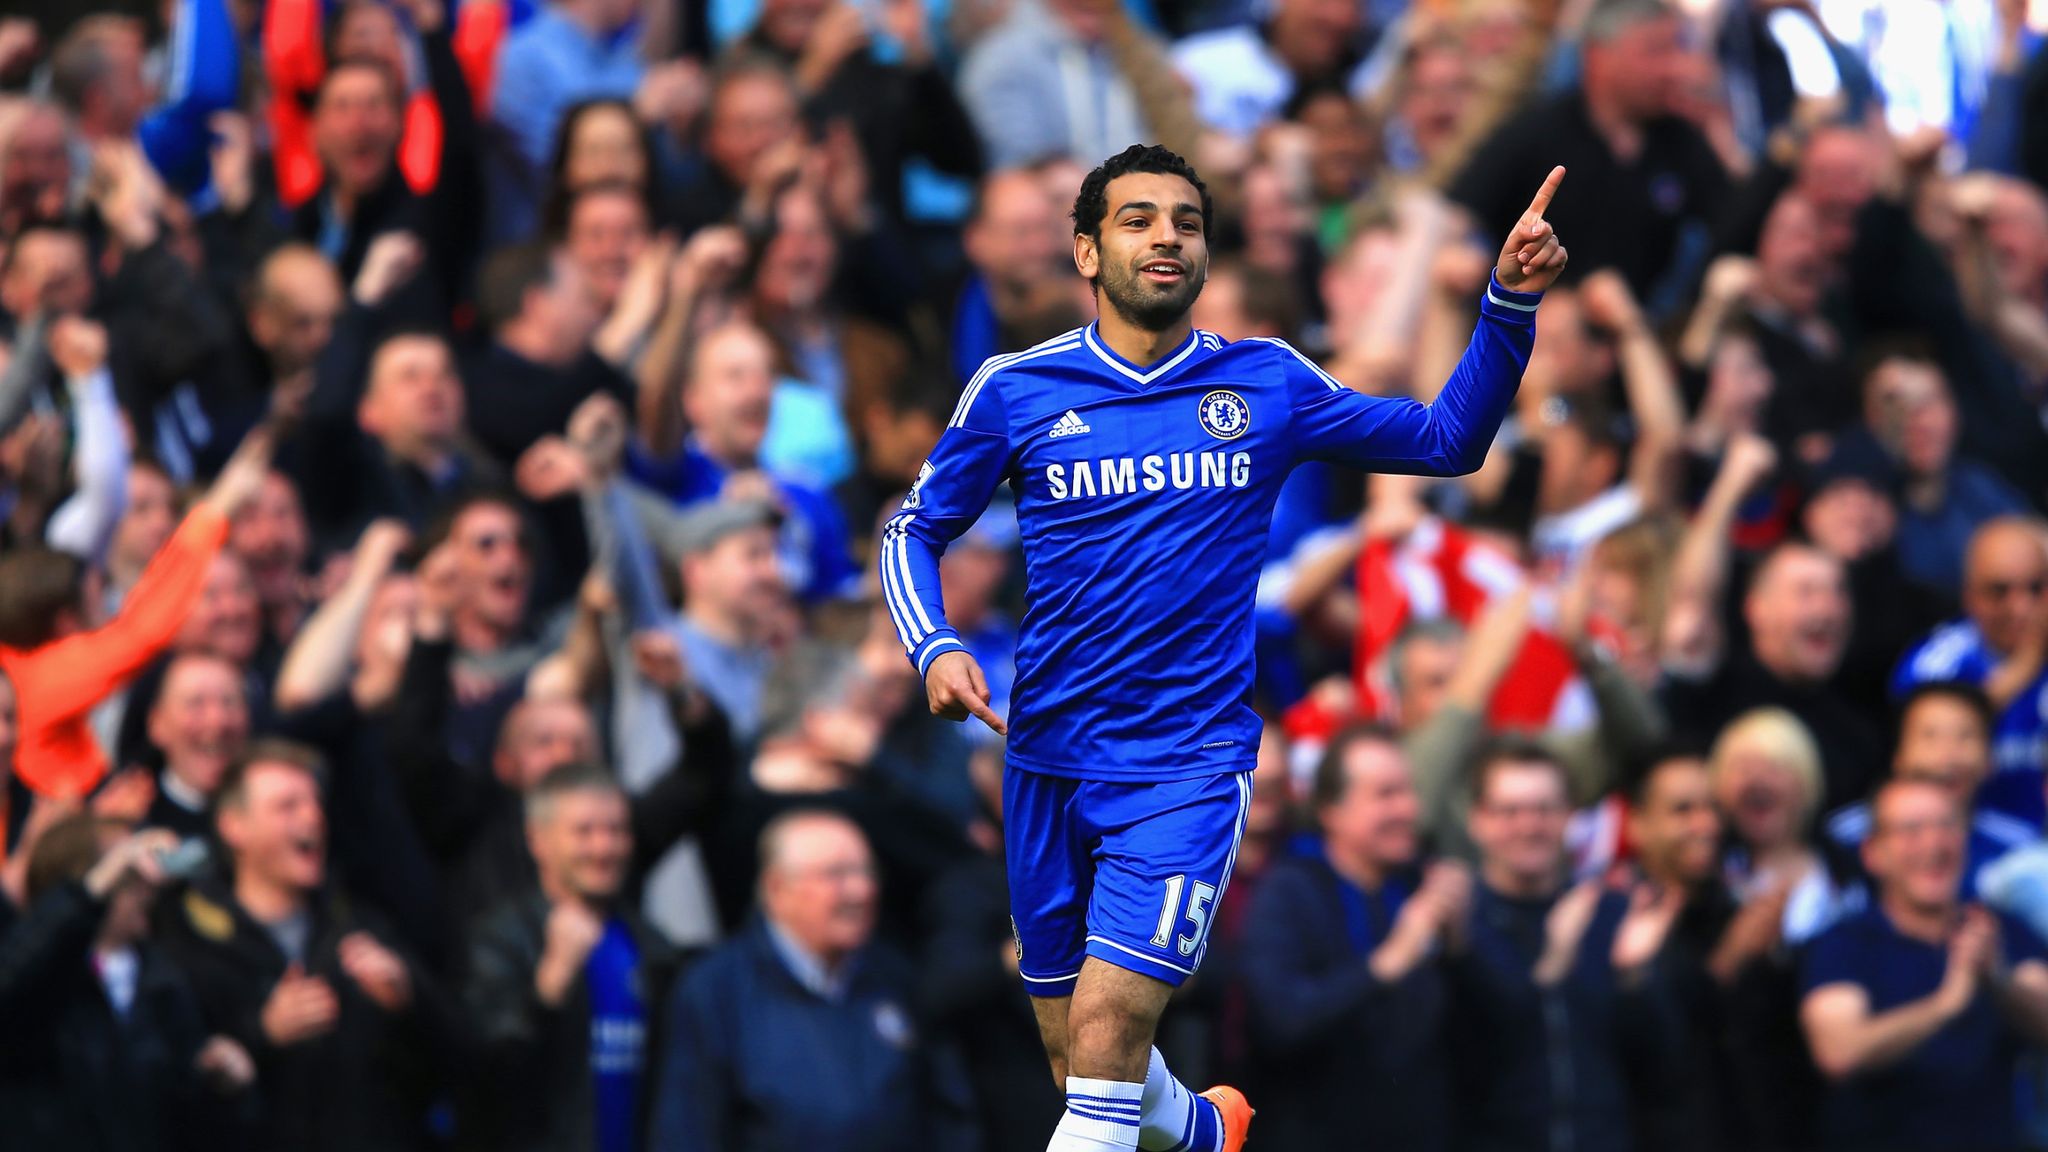 Mohamed Salah returns to Chelsea with Liverpool: How it went wrong for